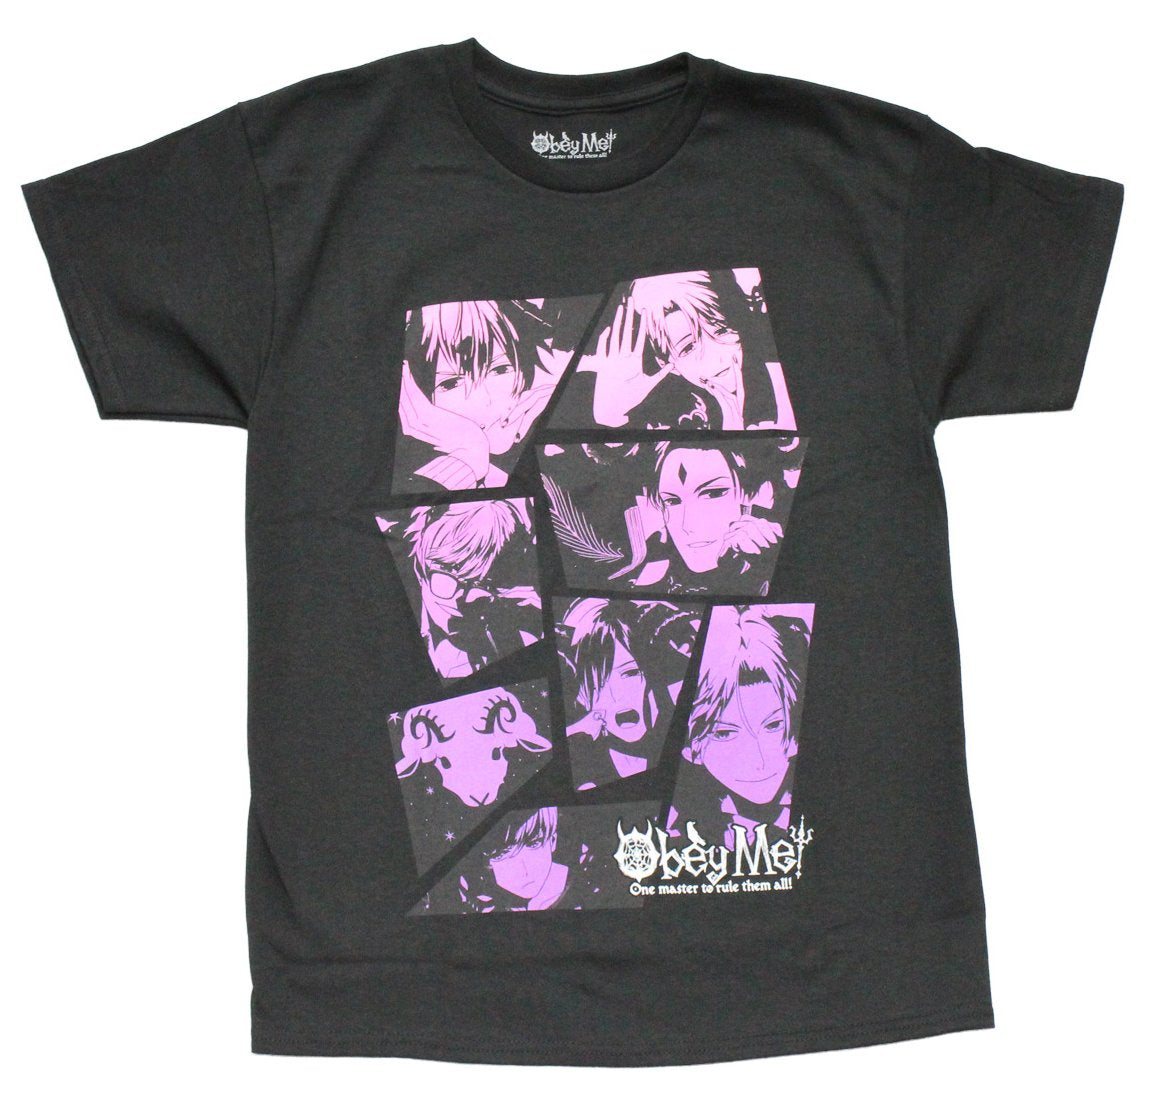 Obey Me Mens T-Shirt - One Master to Rule Them All Pink & Purple Cast